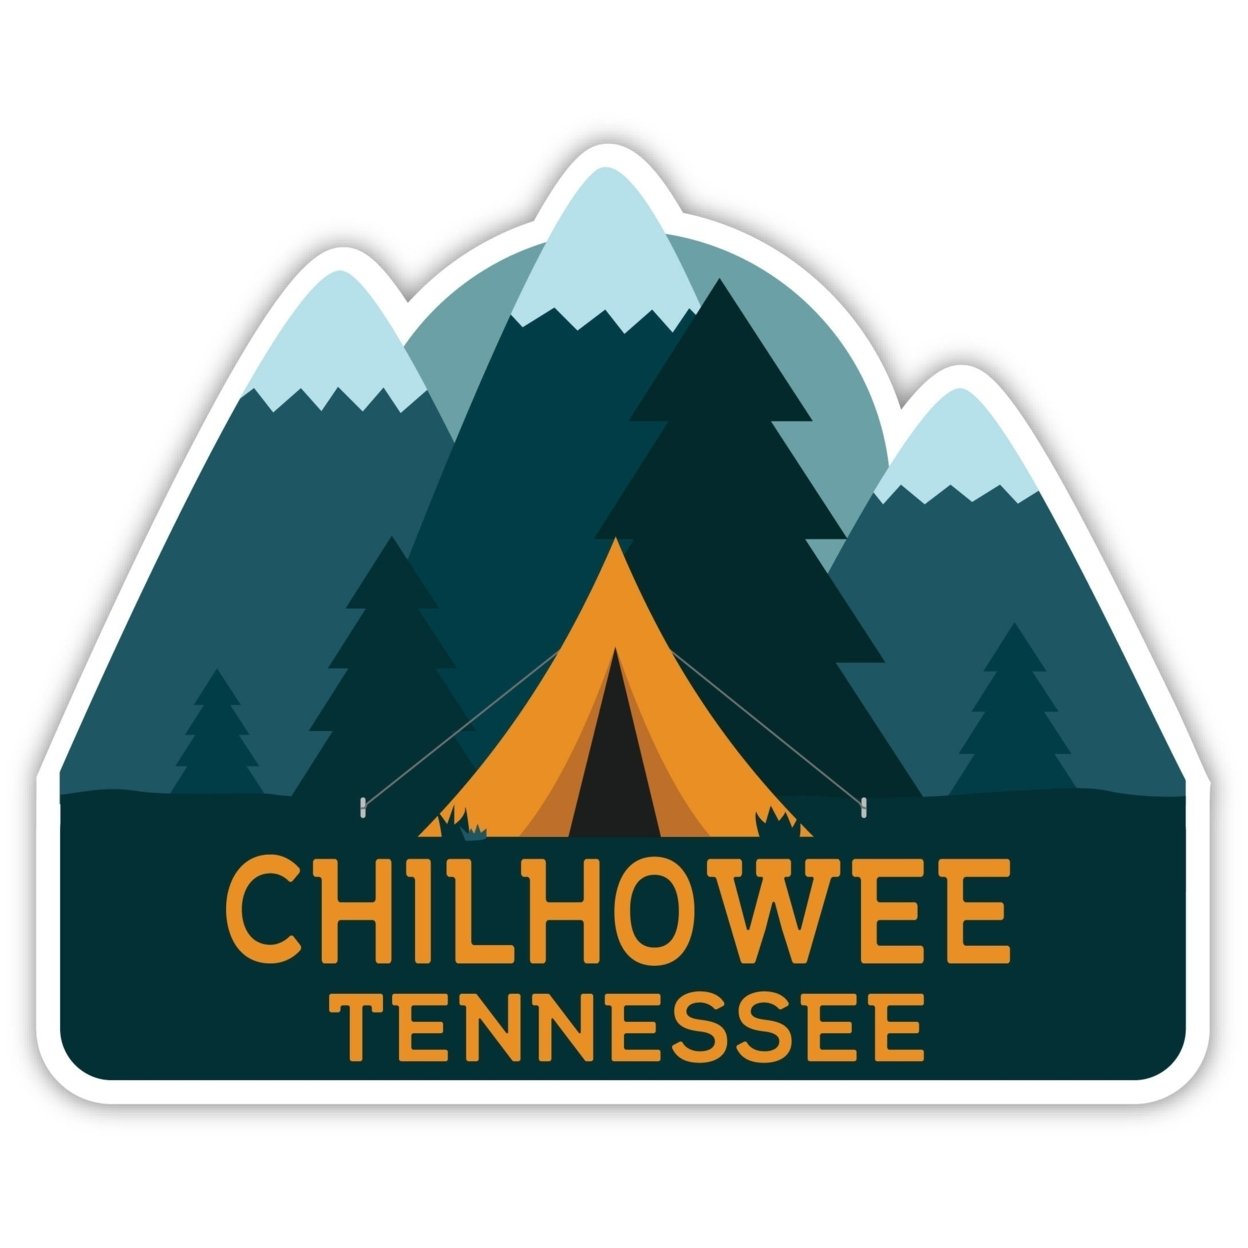 Chilhowee Tennessee Souvenir Decorative Stickers (Choose Theme And Size) - 4-Pack, 6-Inch, Camp Life